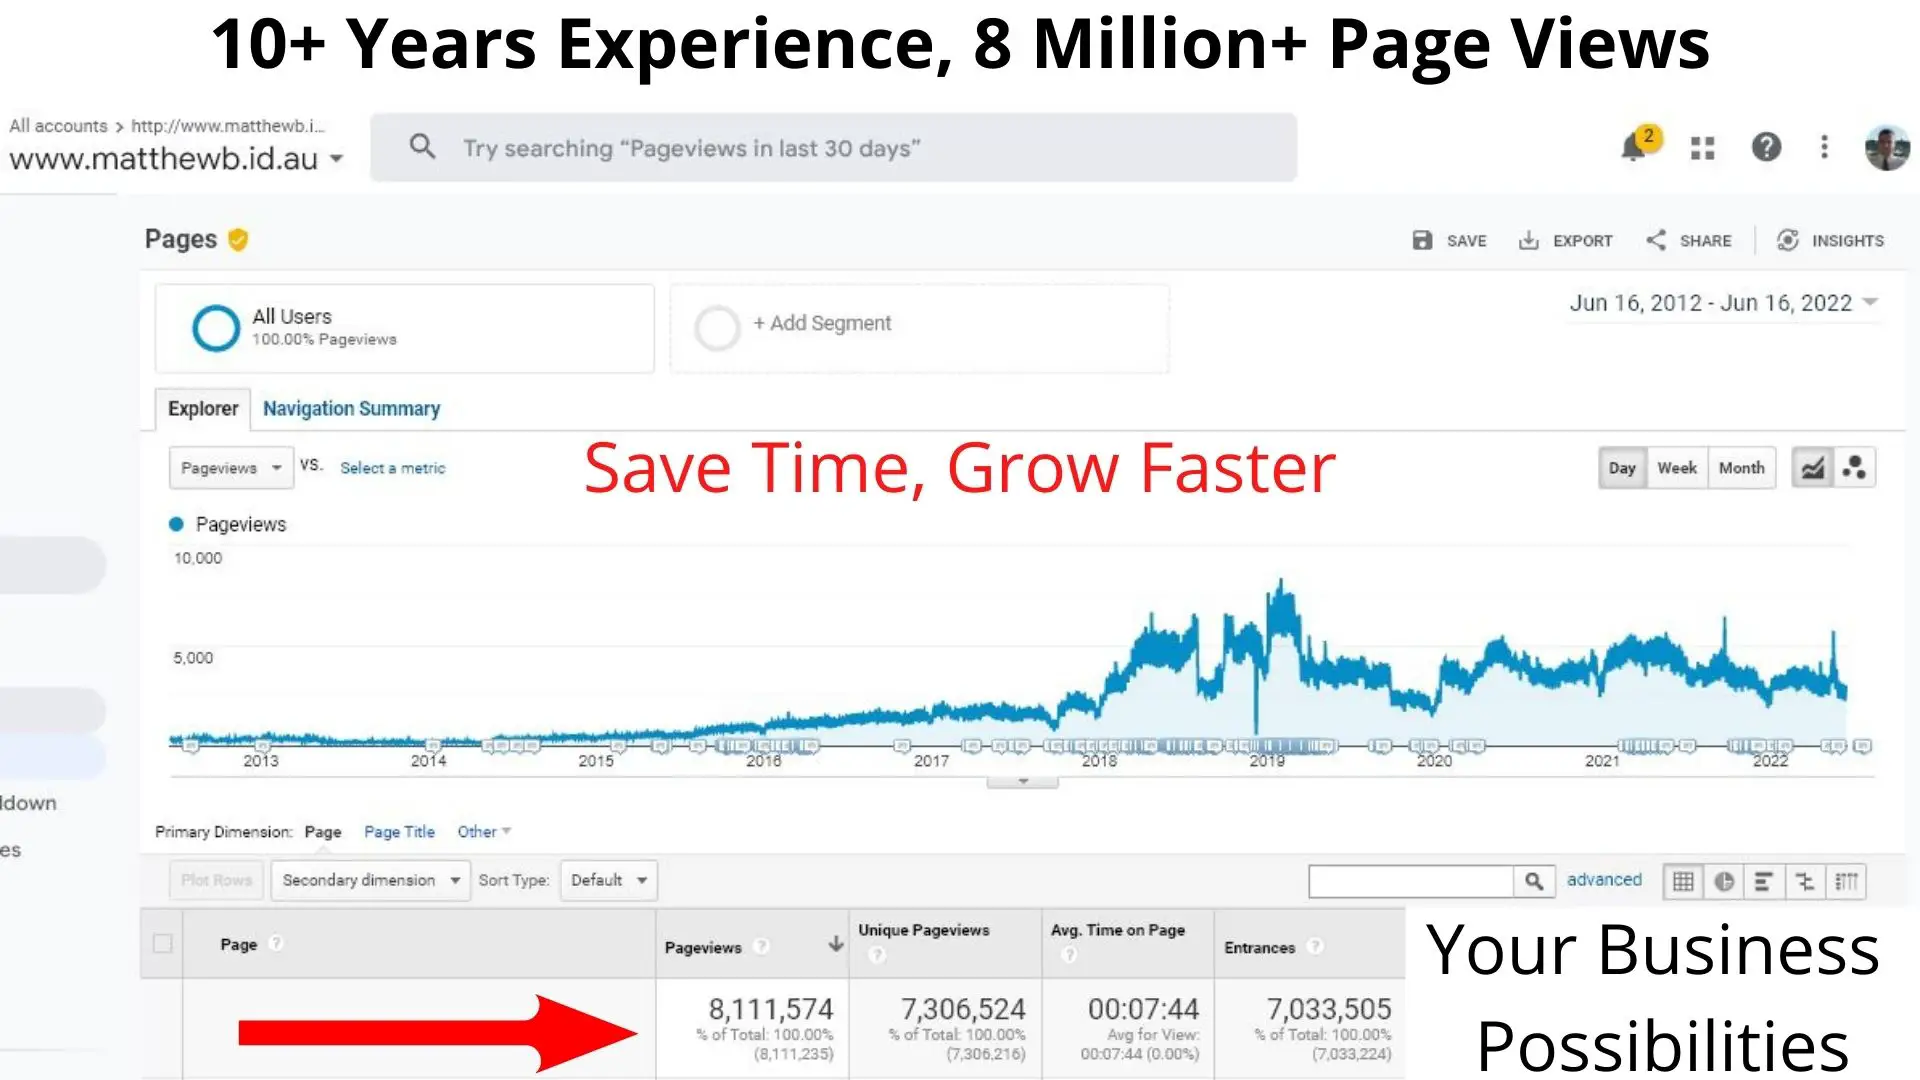 Matthew Bulat - 8 Million Web Page views in 10 years. Leverage the experience and grow your business faster.